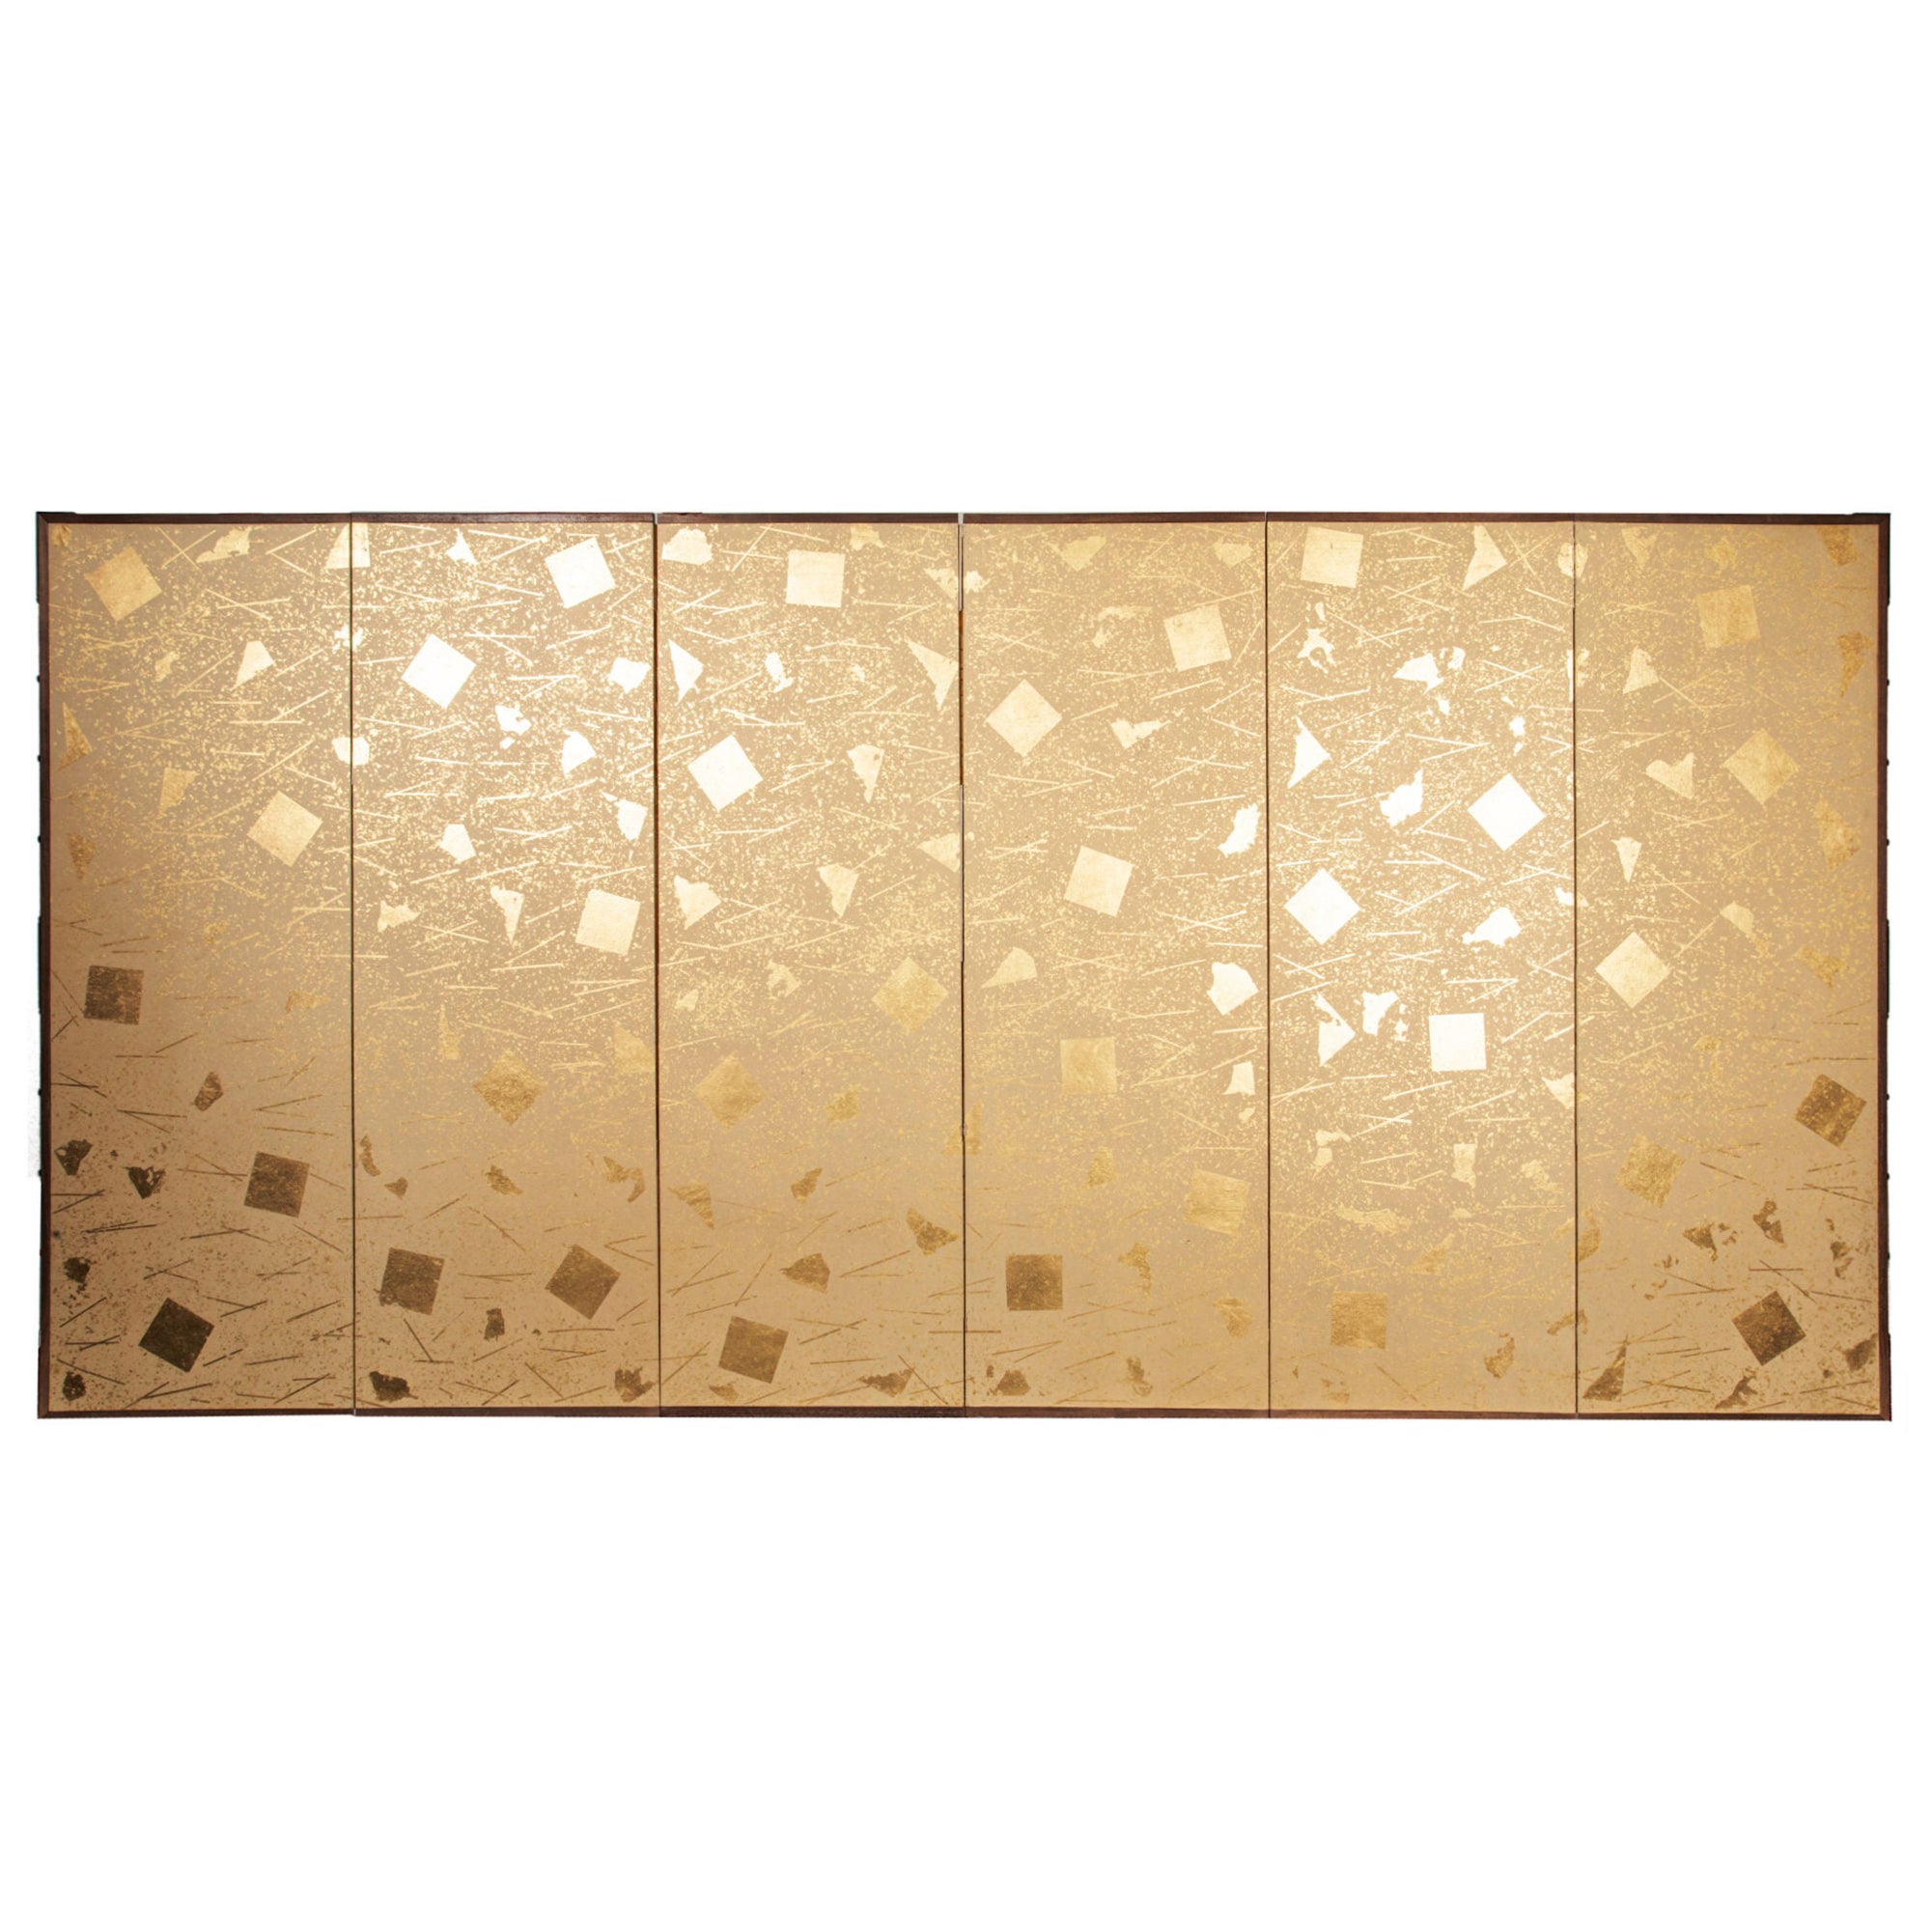 Japanese Six Panel Screen: Abstract Gold Leaf